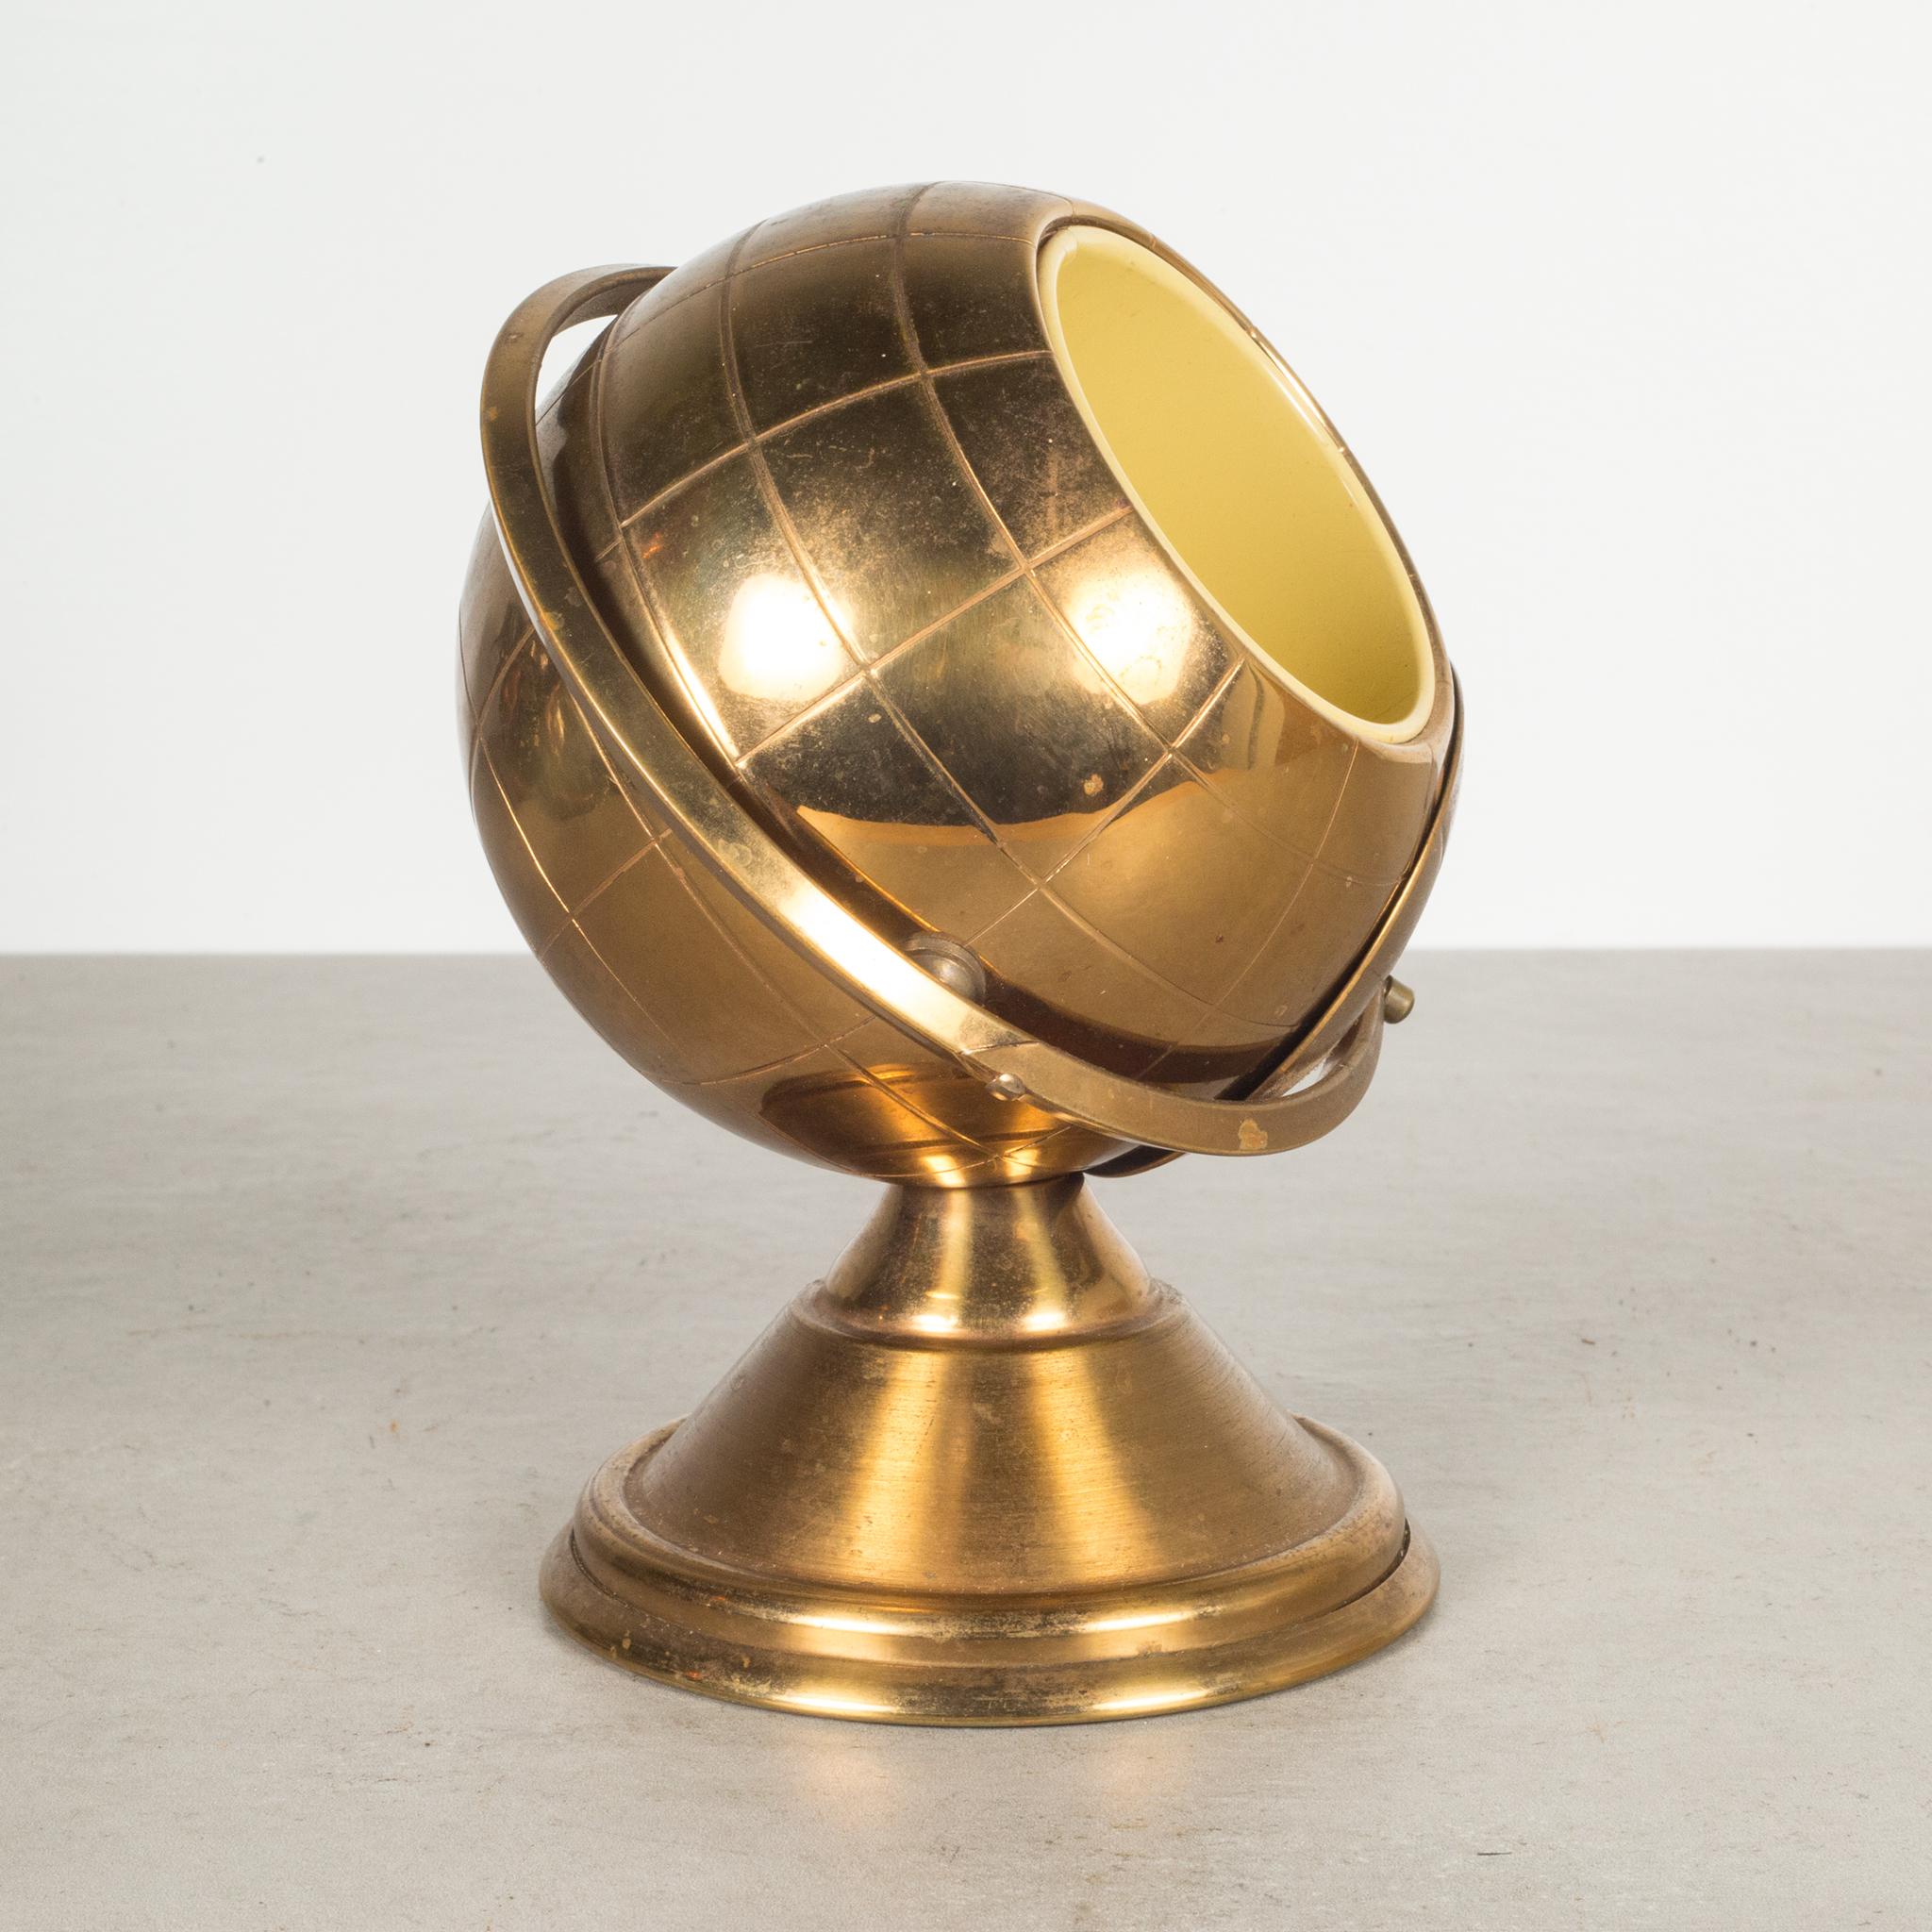 About 

This is an original midcentury brass cigarette holder. The lid slides open on the globe's axis to reveal a metal interior designed to hold cigarettes. This globe is unique because it has a leather nameplate on the bottom. This piece has